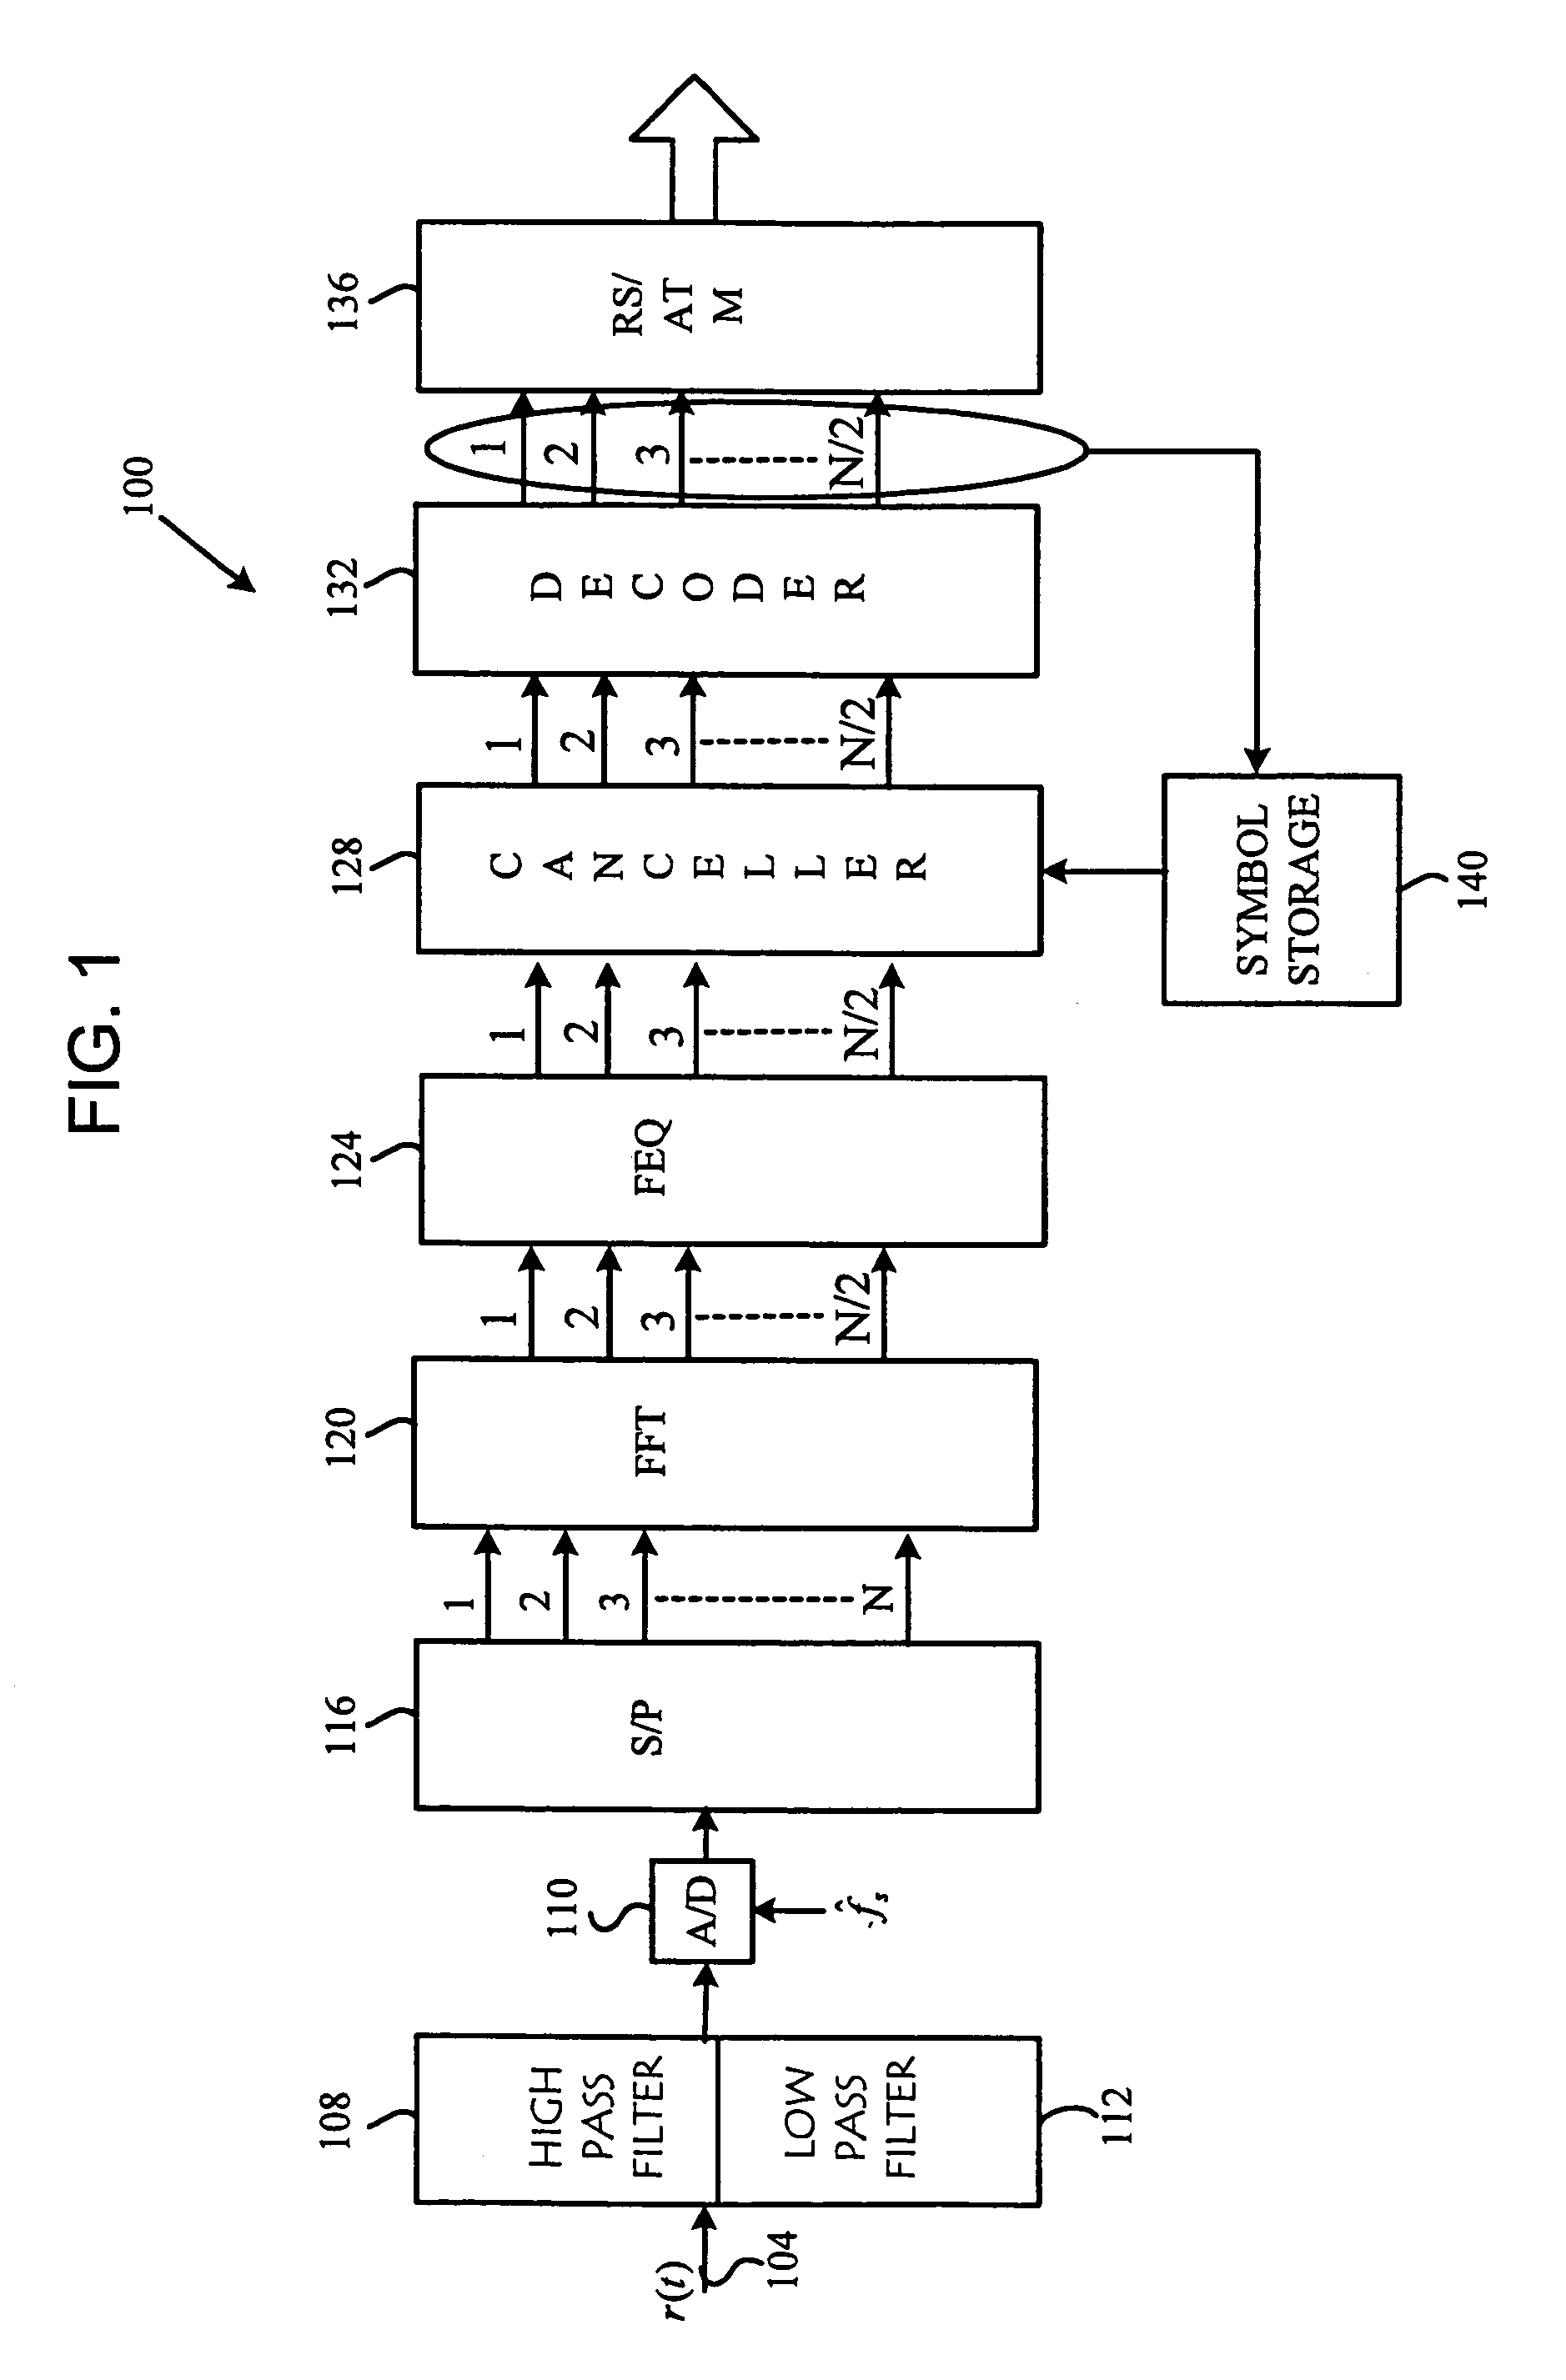 Method and system for a multiple dimensional adaptive frequency domain noise canceler for DMT transceivers